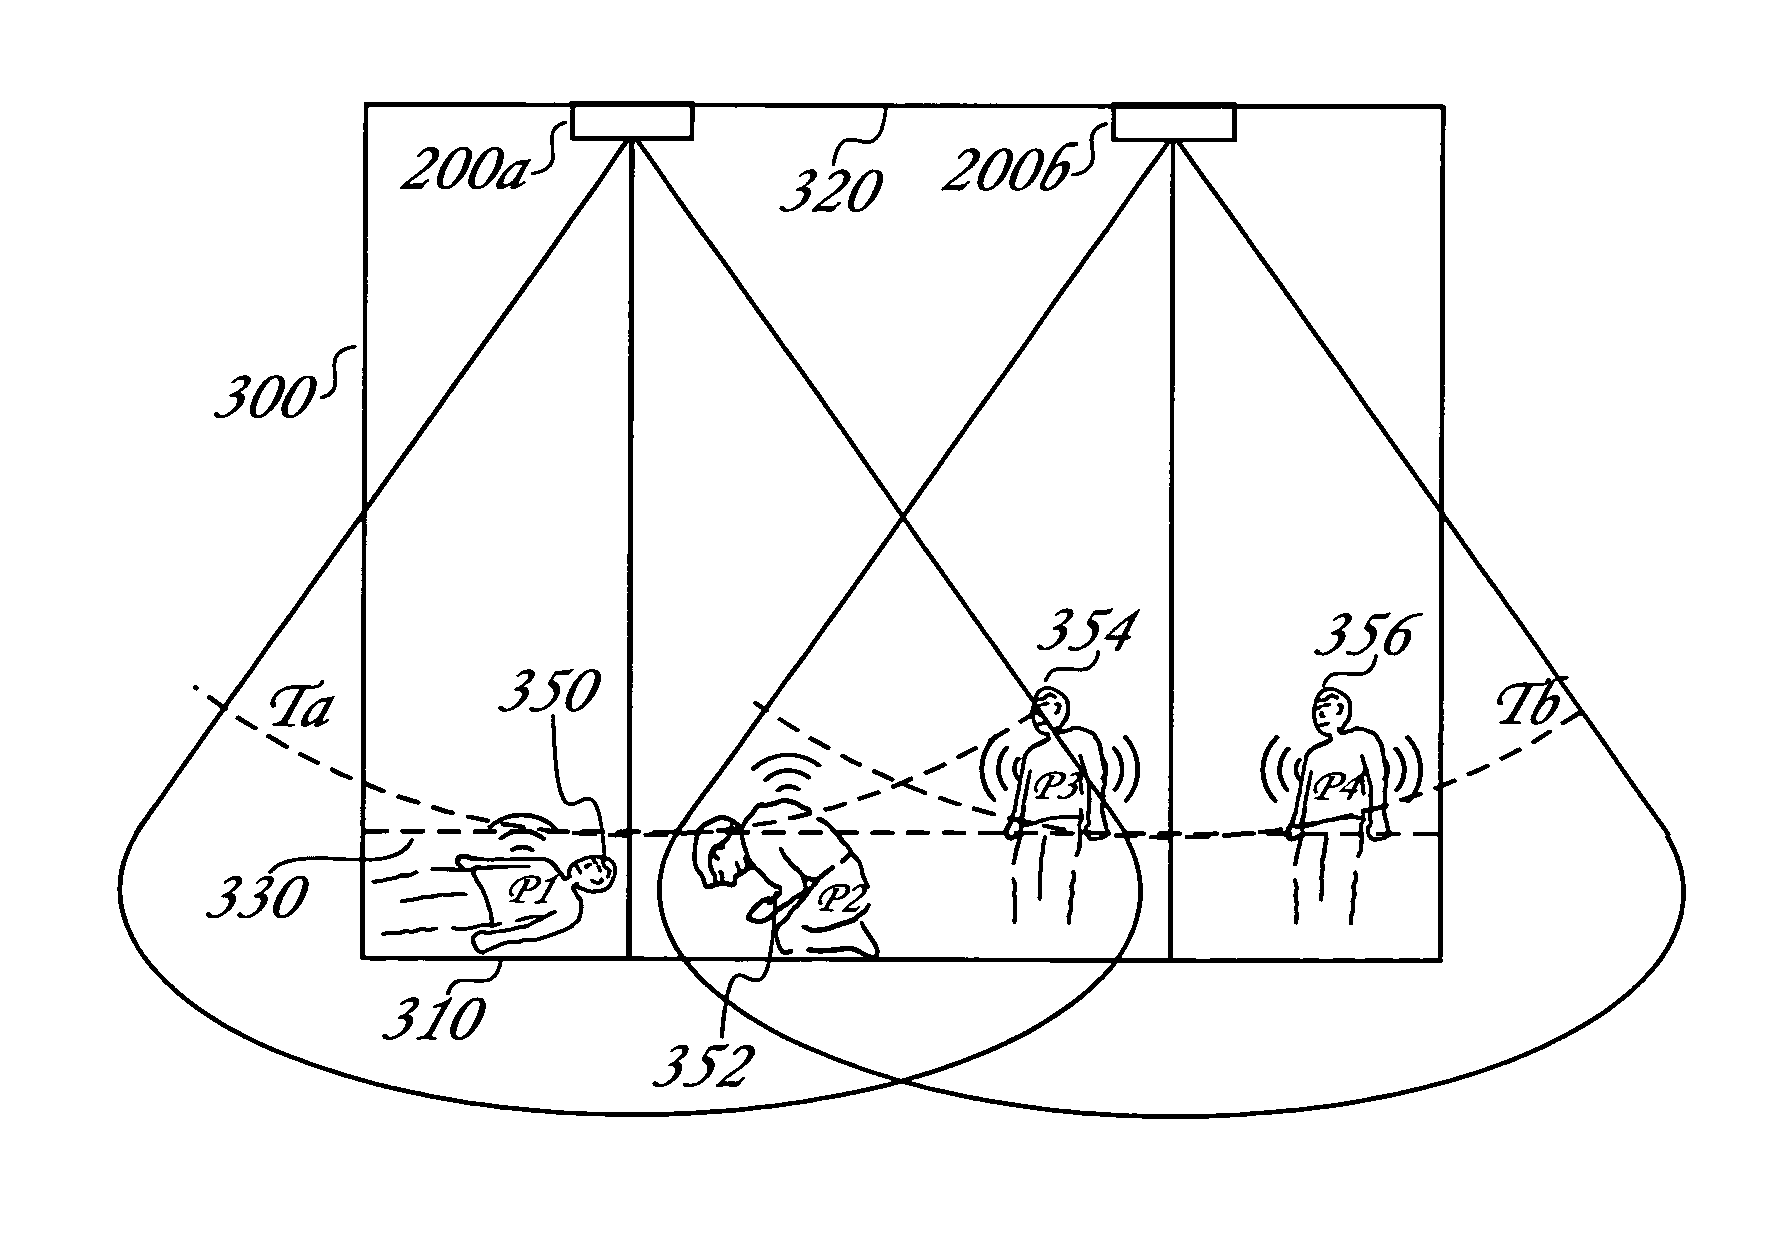 Method and apparatus for a body position monitor and fall detector using radar